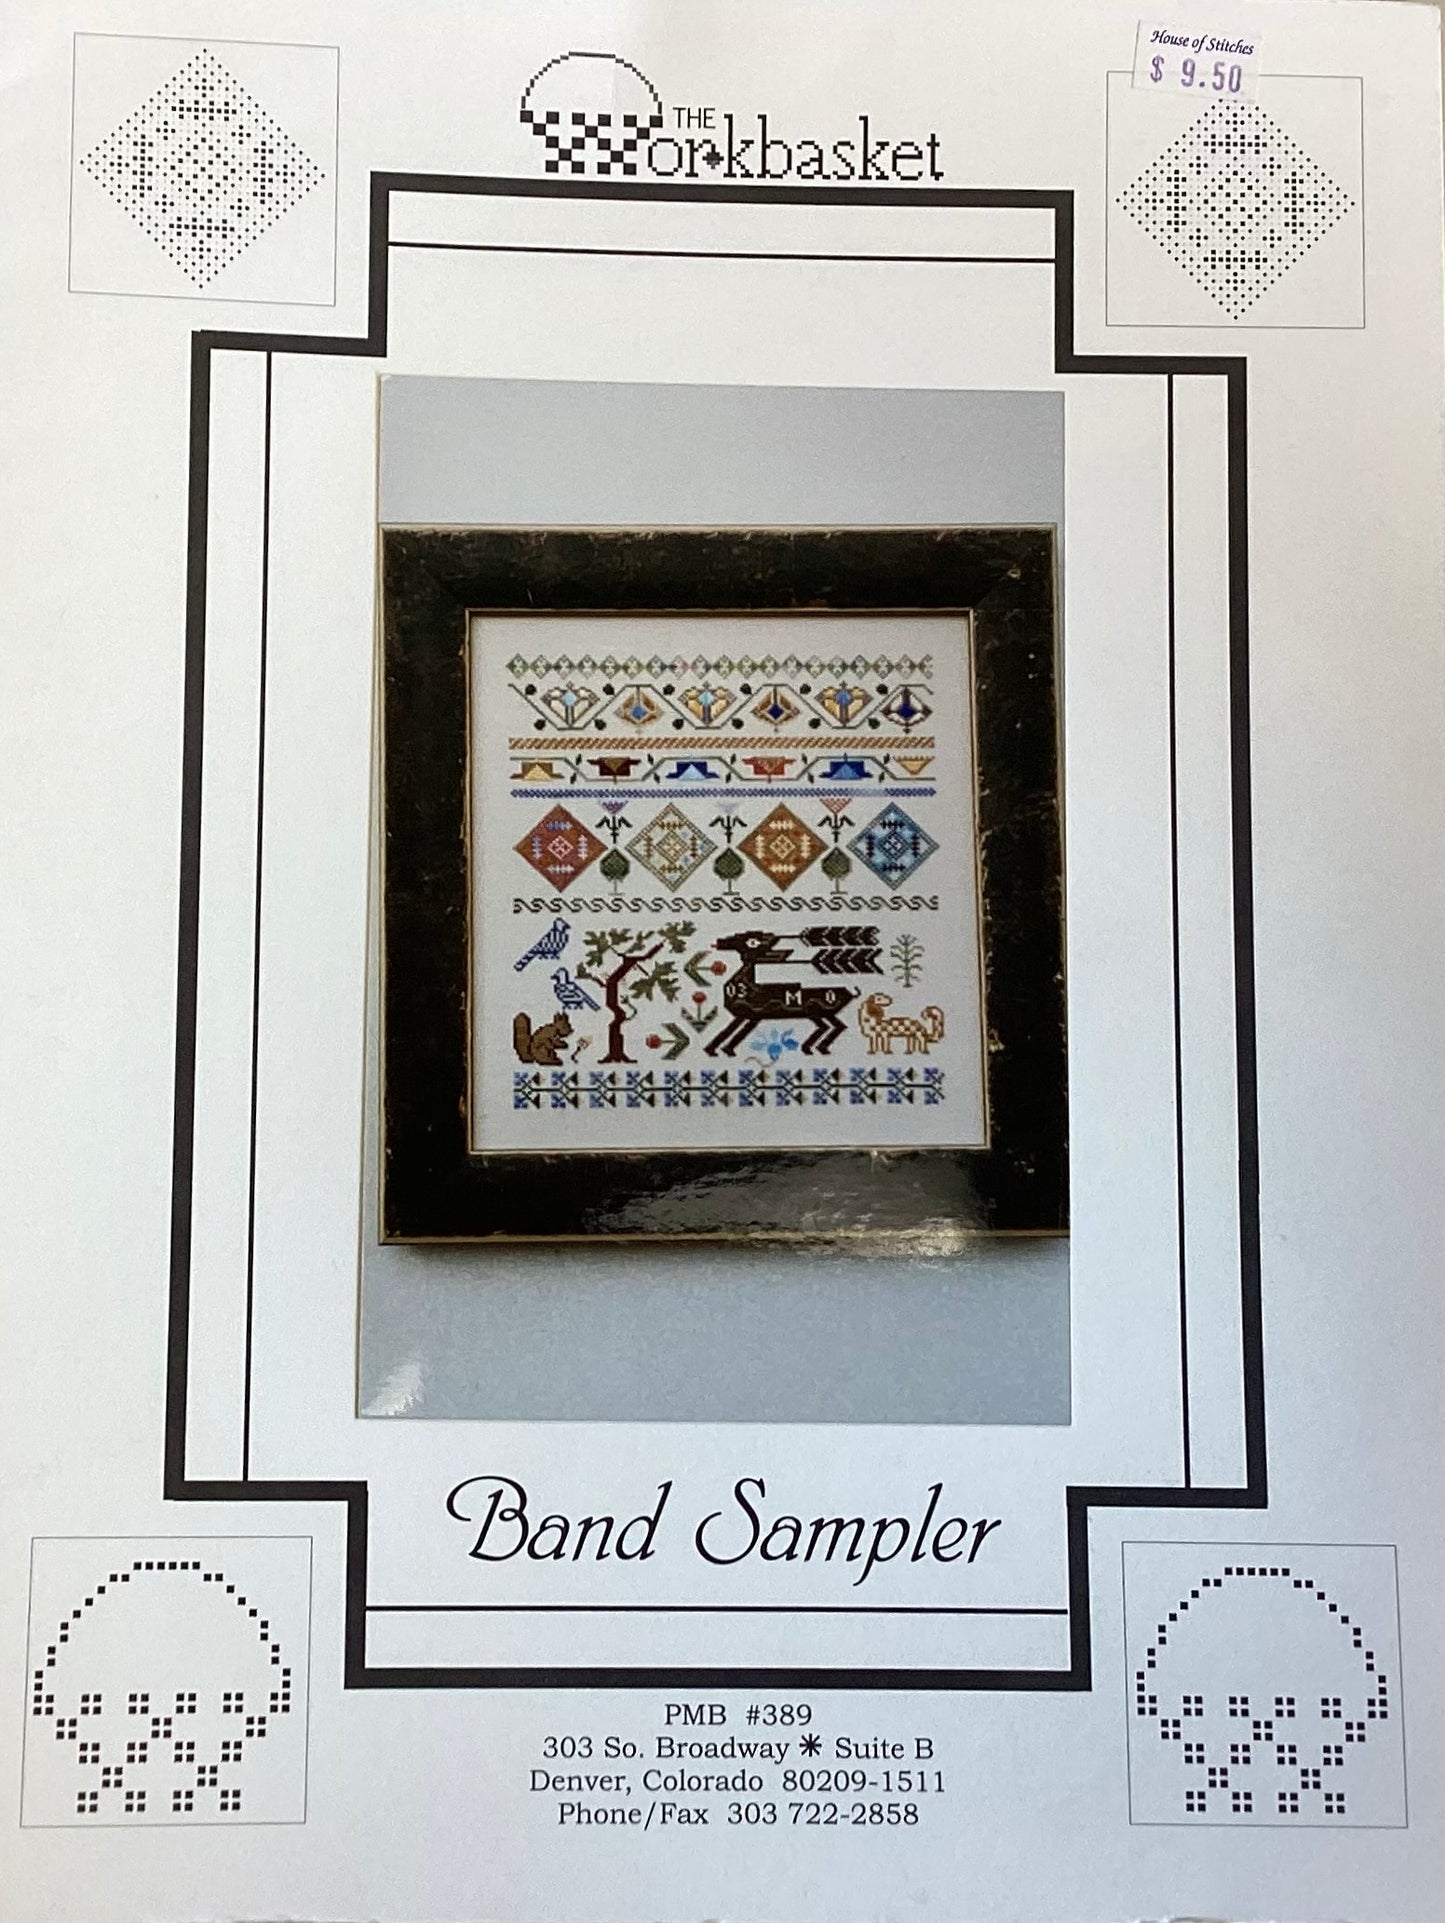 Band Sampler by The Workbasket